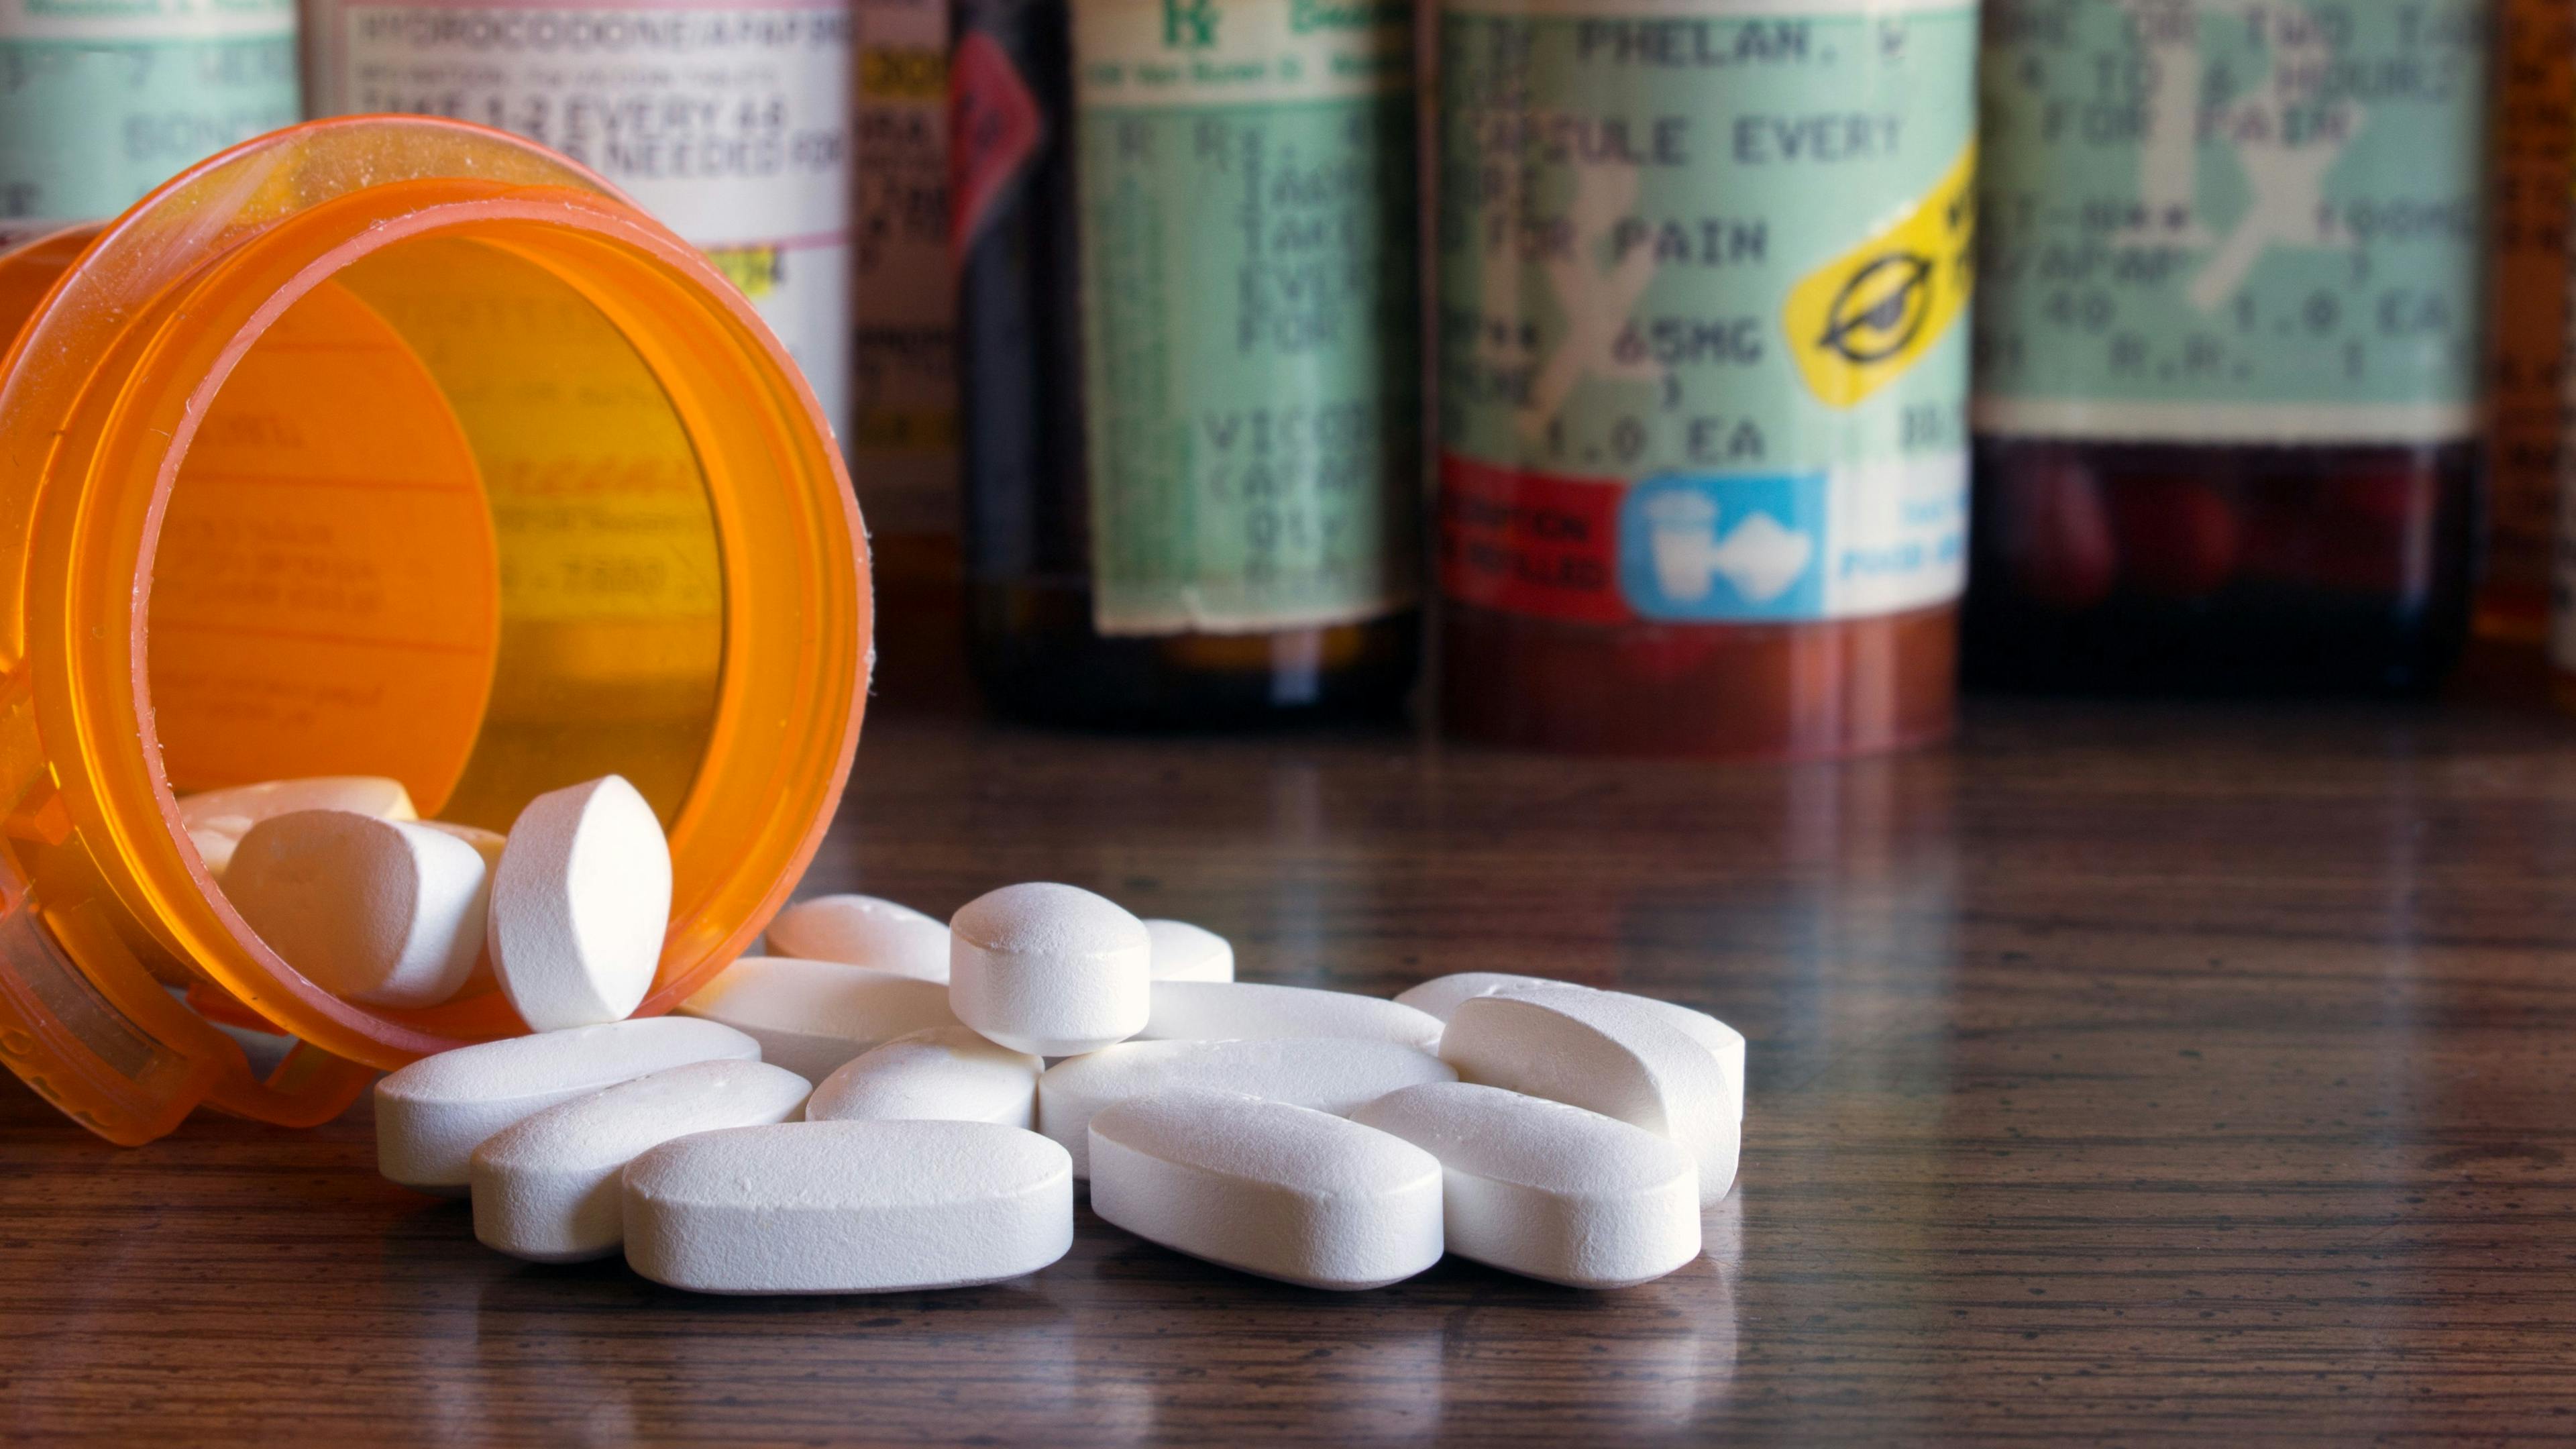 Prescription opioids with many bottles of pills in the background. | Kimberly Boyles - stock.adobe.com